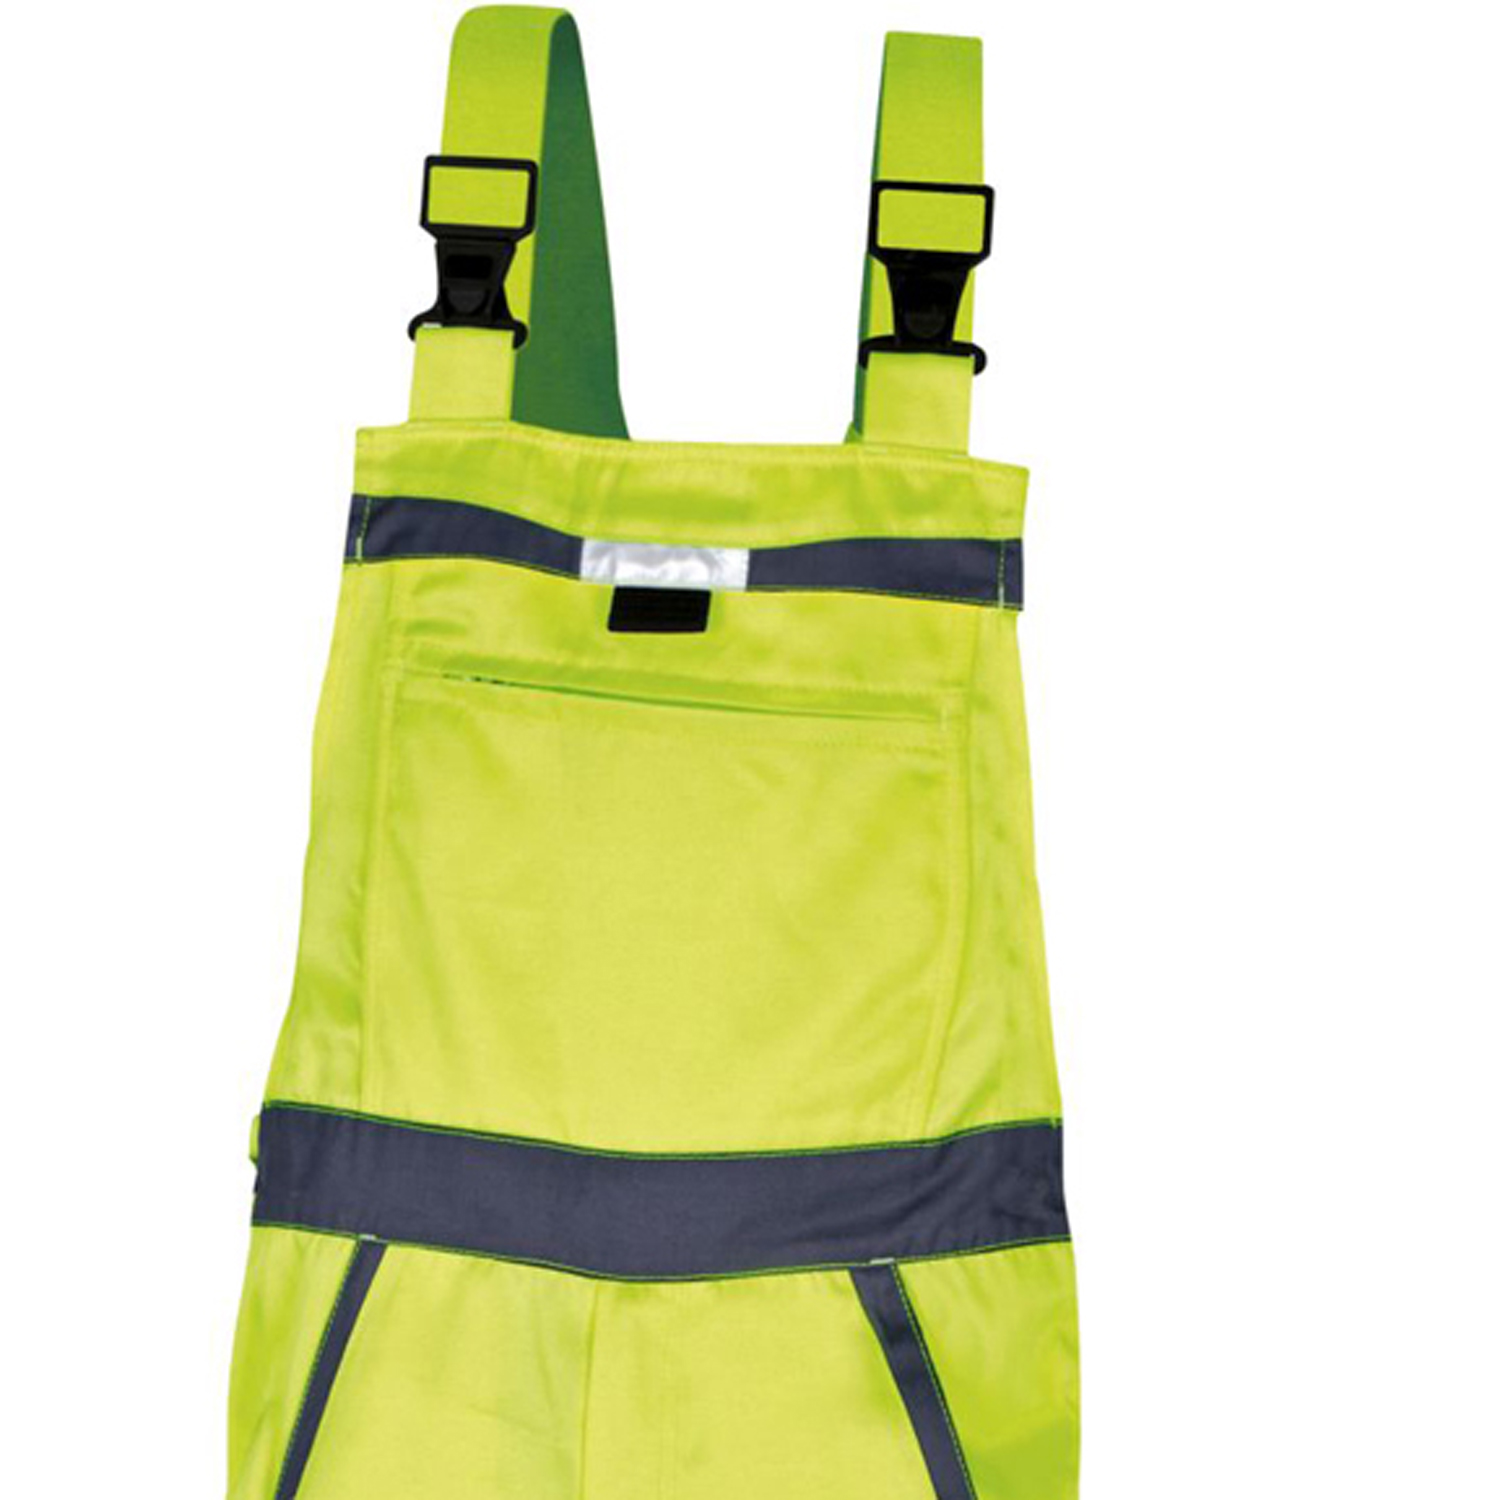 Work overalls in yellow by PKA Klöcker in large sizes 58-66